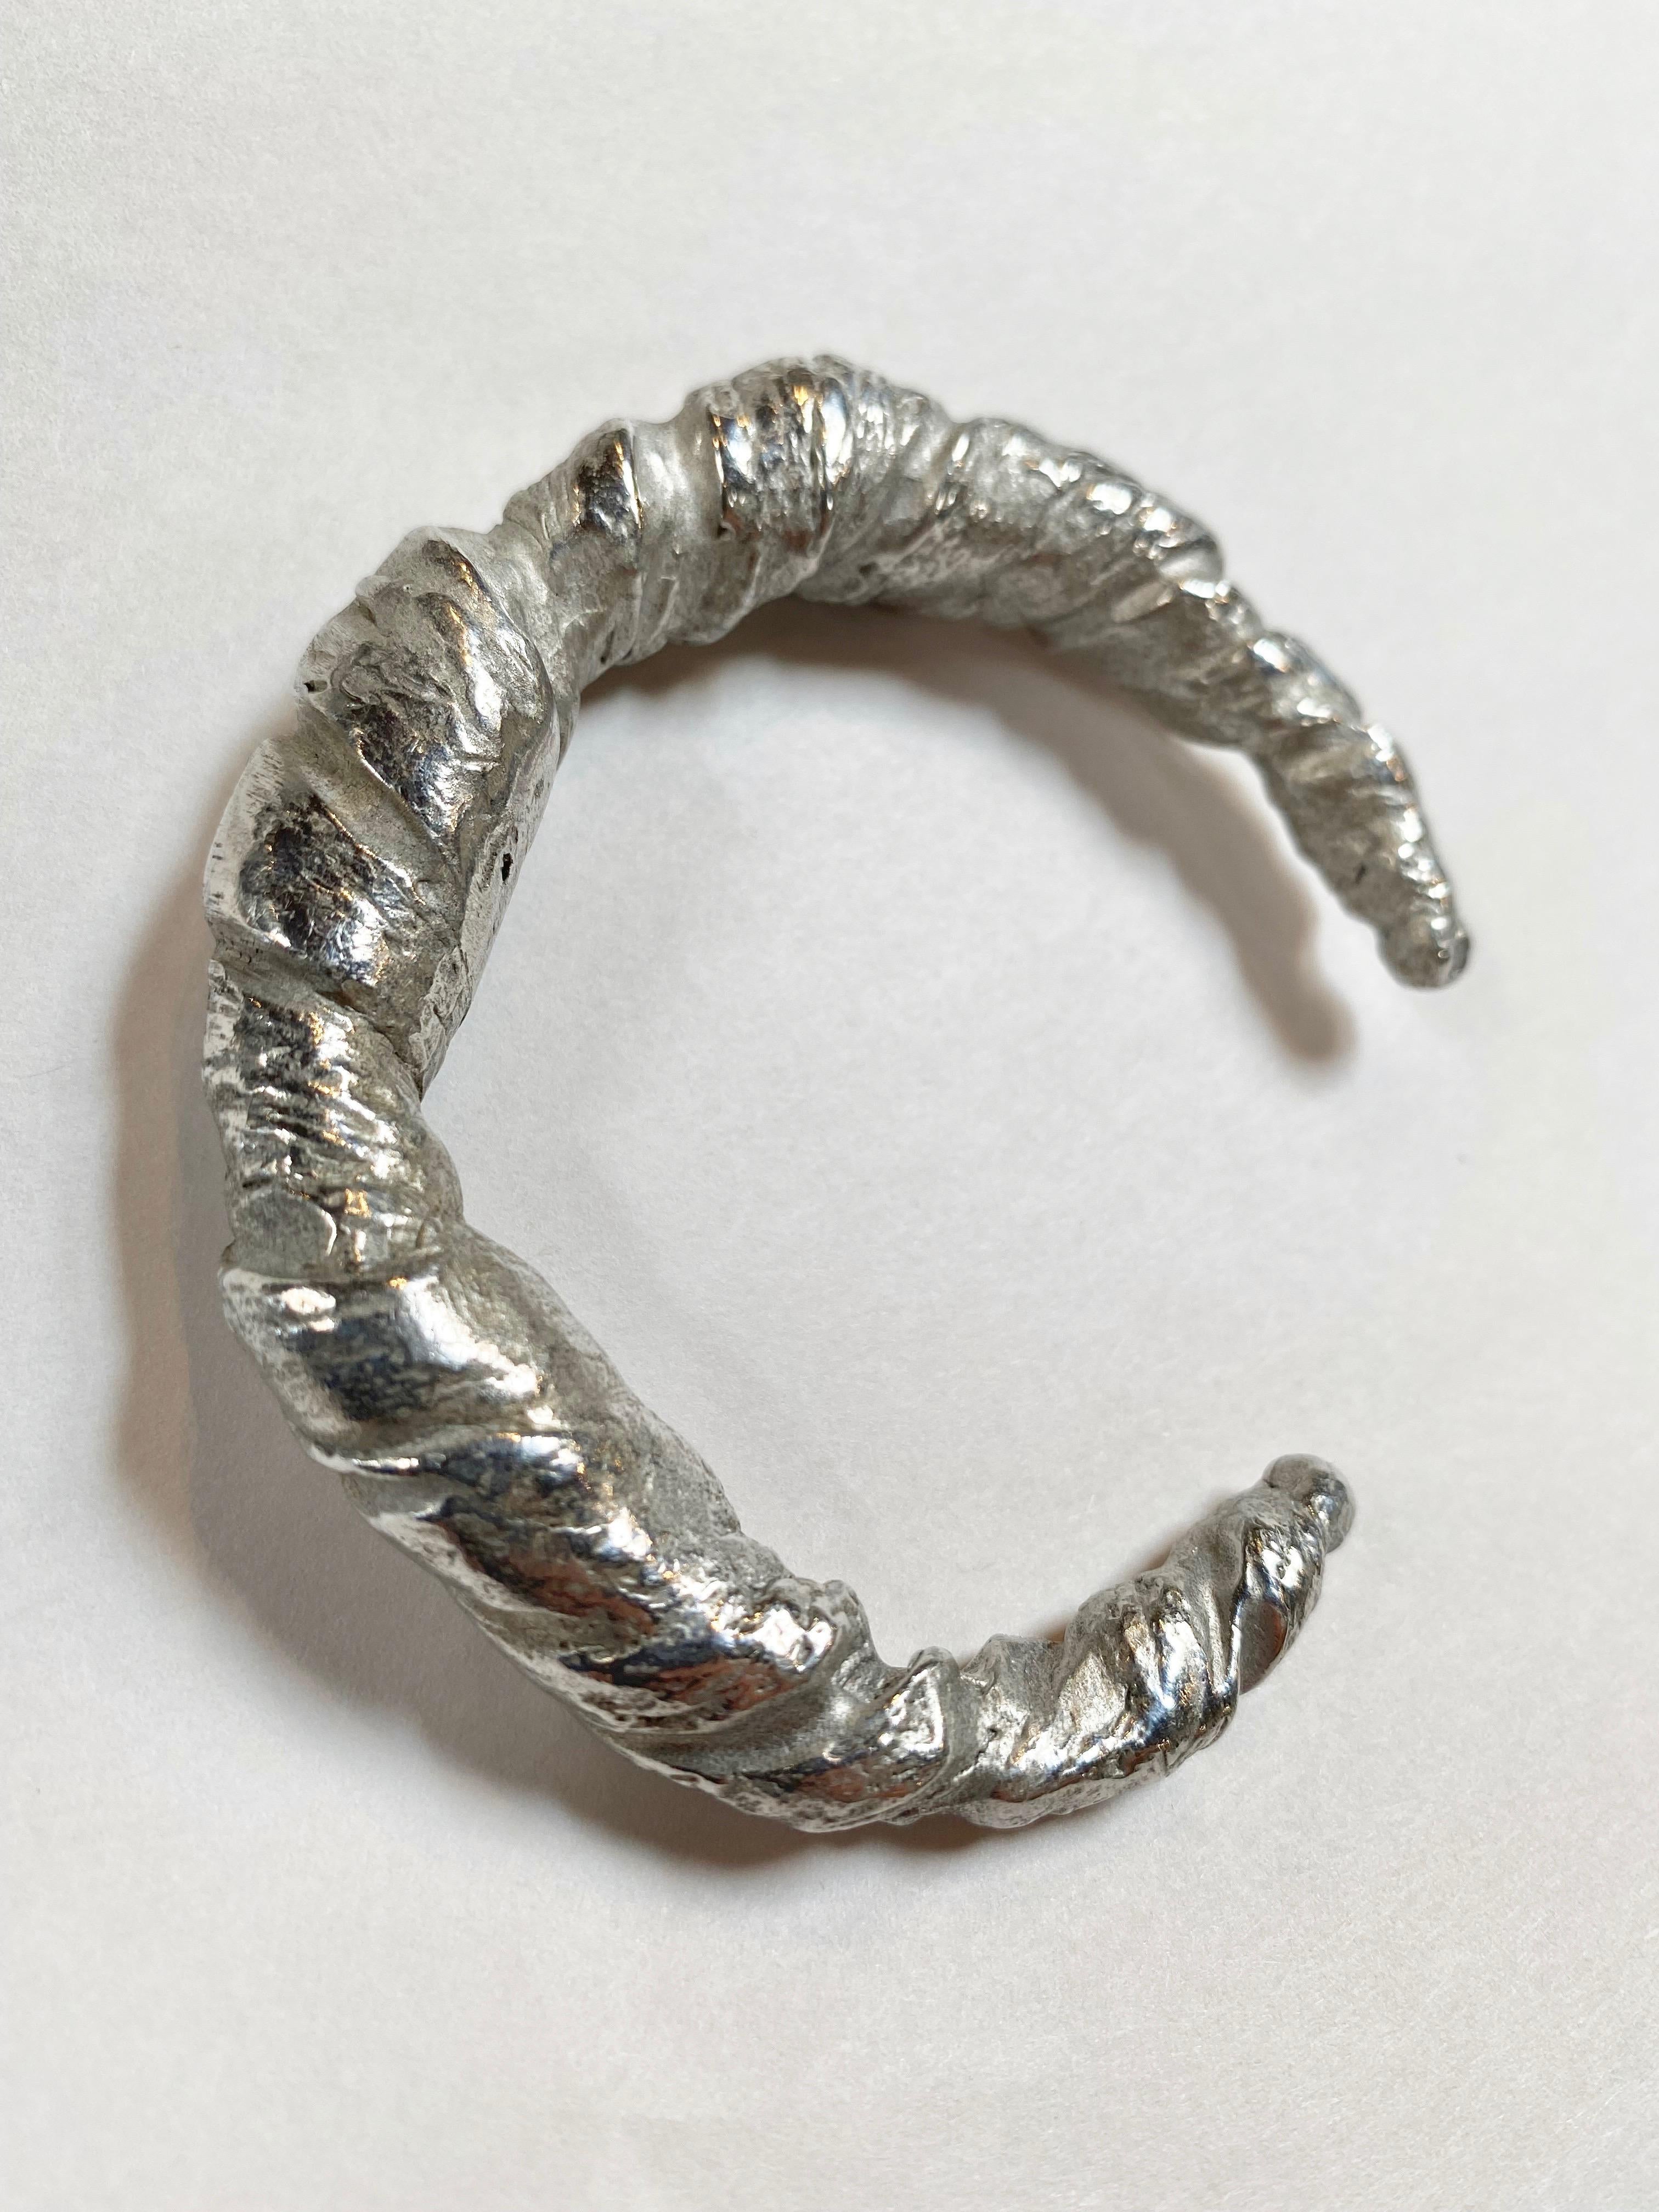 Wrapped silver bangle bracelet with a crinkled fabric effect from DAMIR DOMA. 